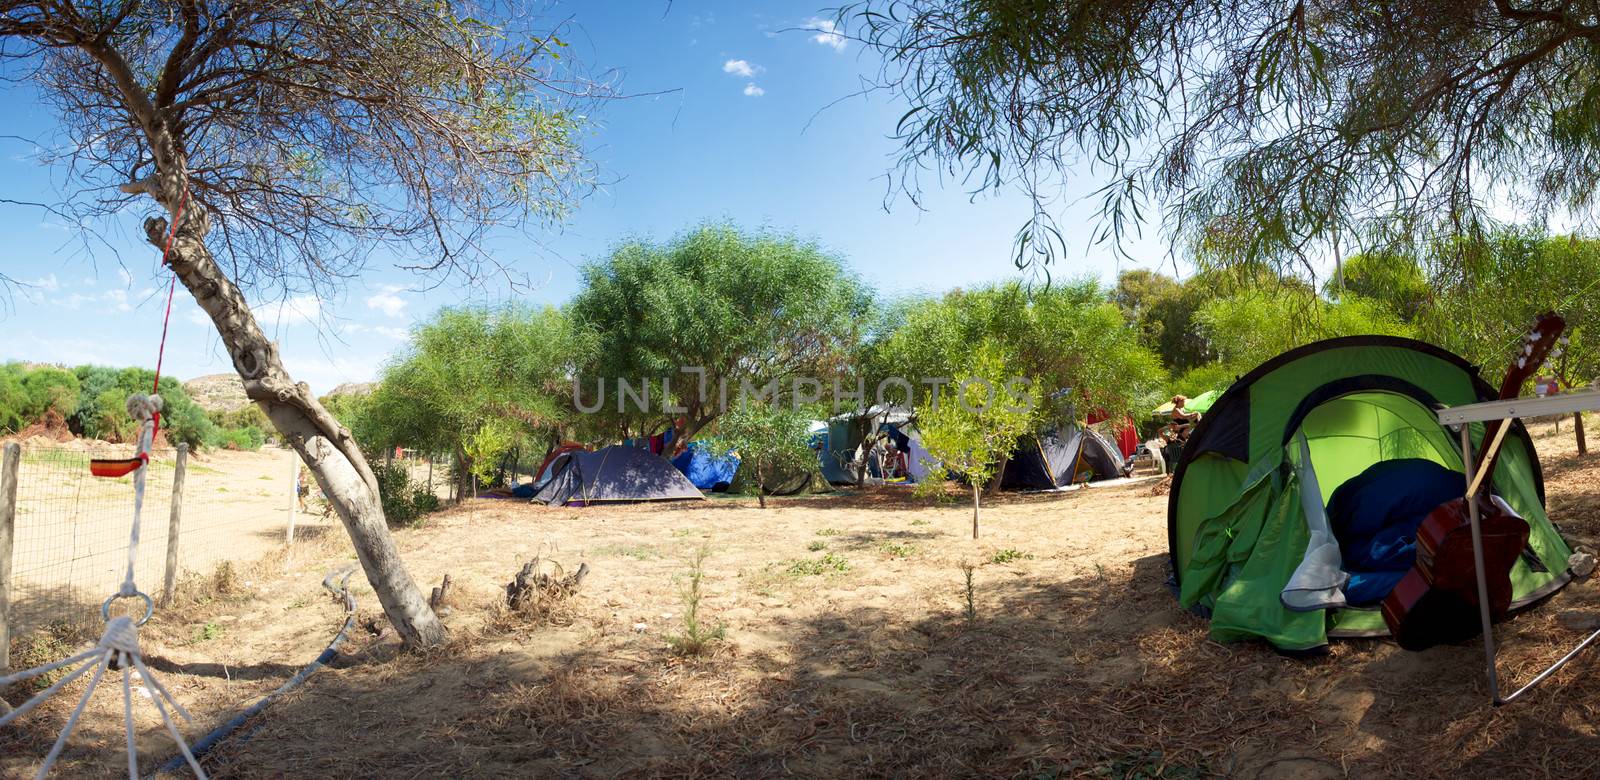 Panorama of a campsite in Sicily by watchtheworld